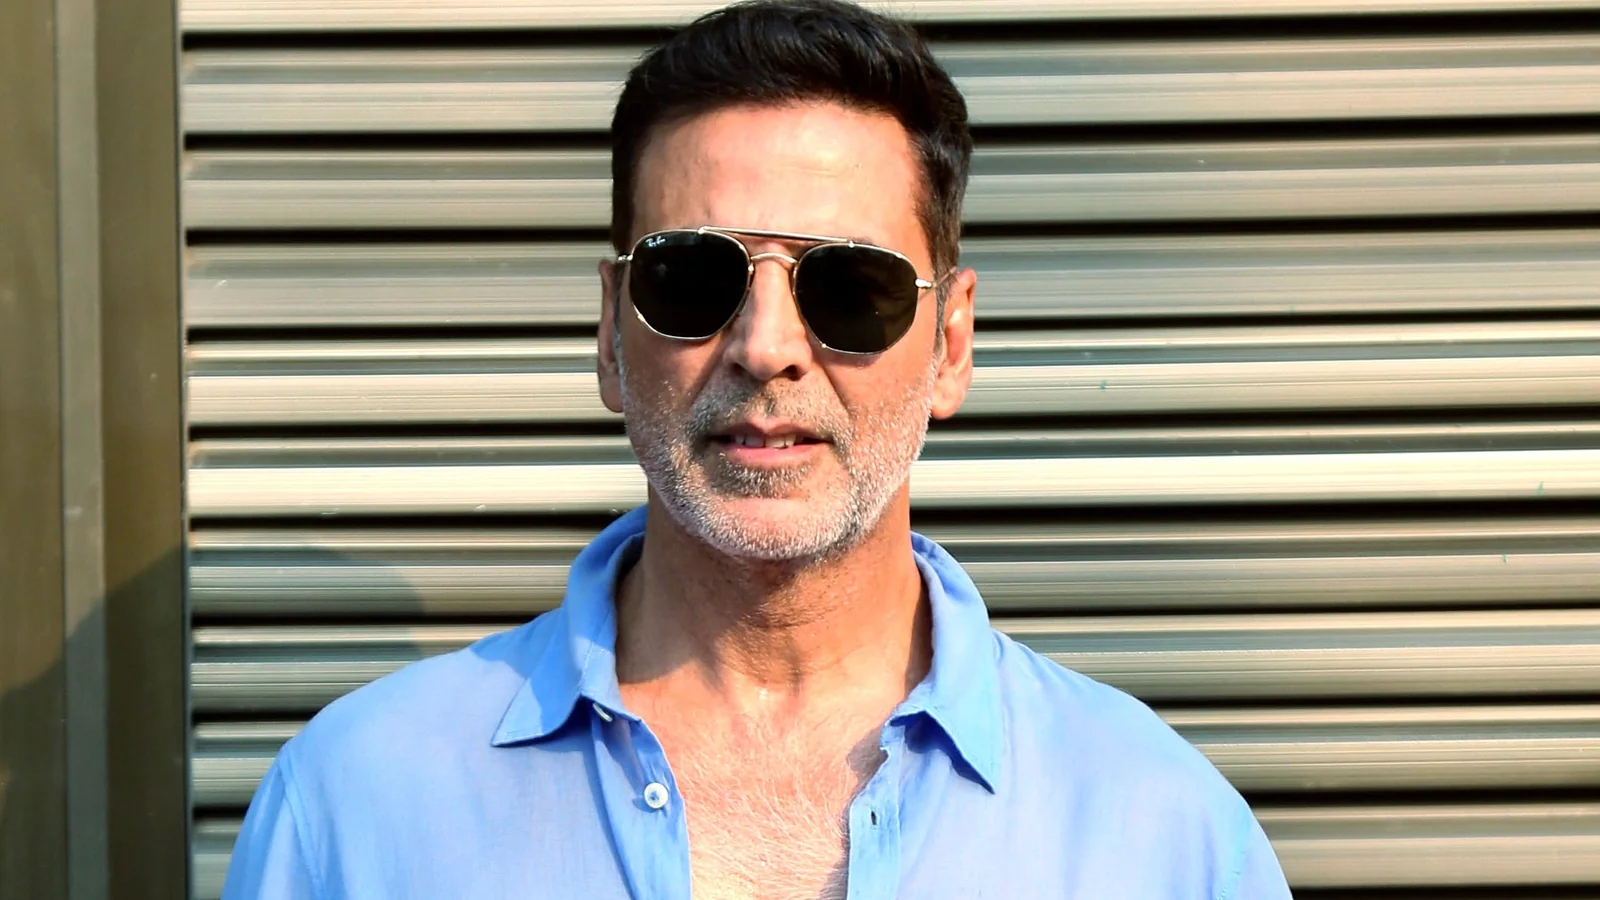 Akshay Kumar hoped Bachchhan Paandey would do better at box office: ‘We came in the eye of The Kashmir Files storm’